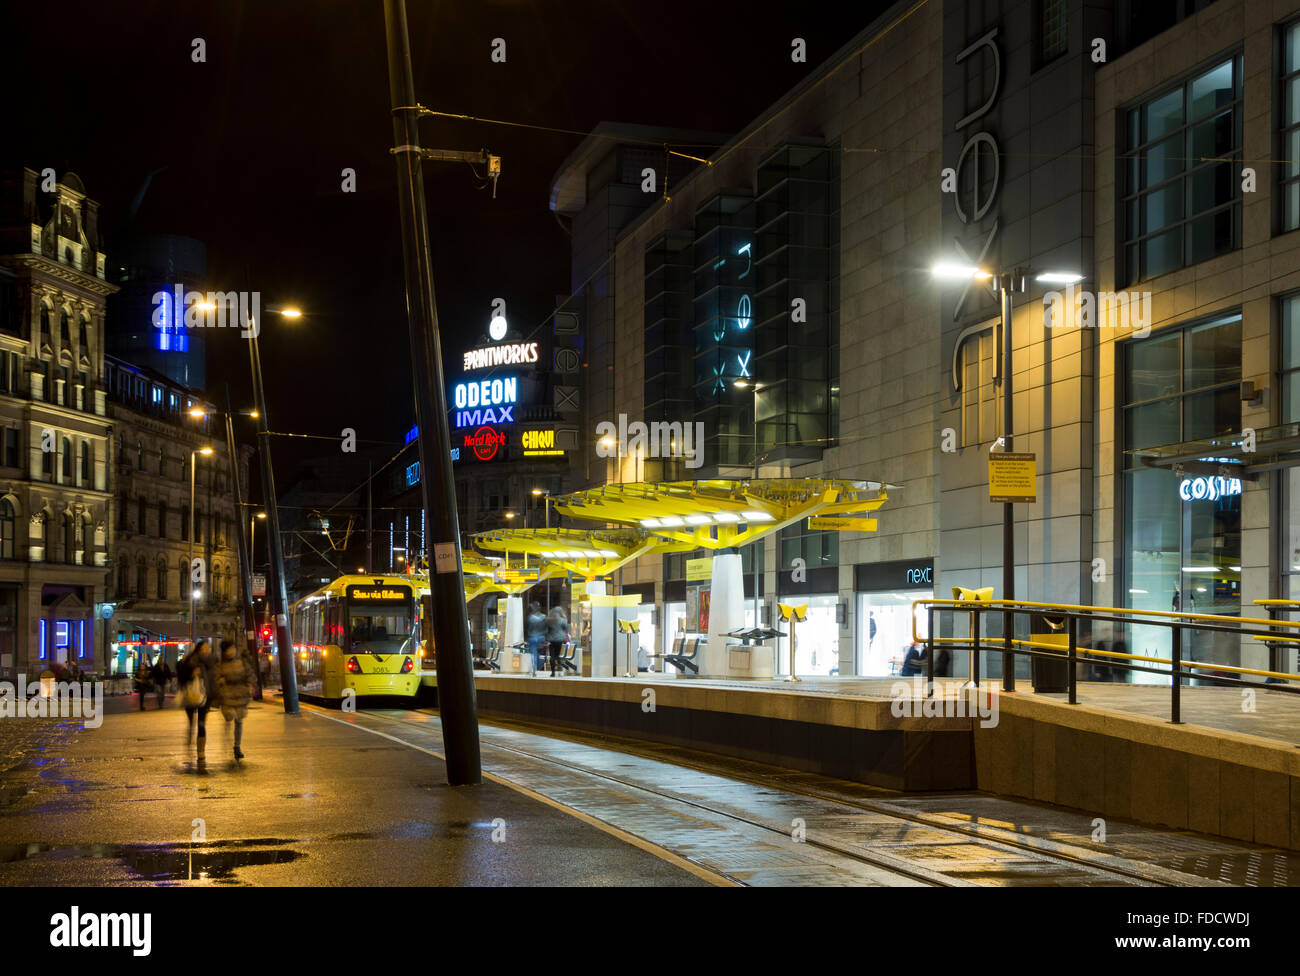 Exchange Square Metrolink tram stop at night, Corporation Street, Manchester, England, UK.  The Arndale Centre at right. Stock Photo